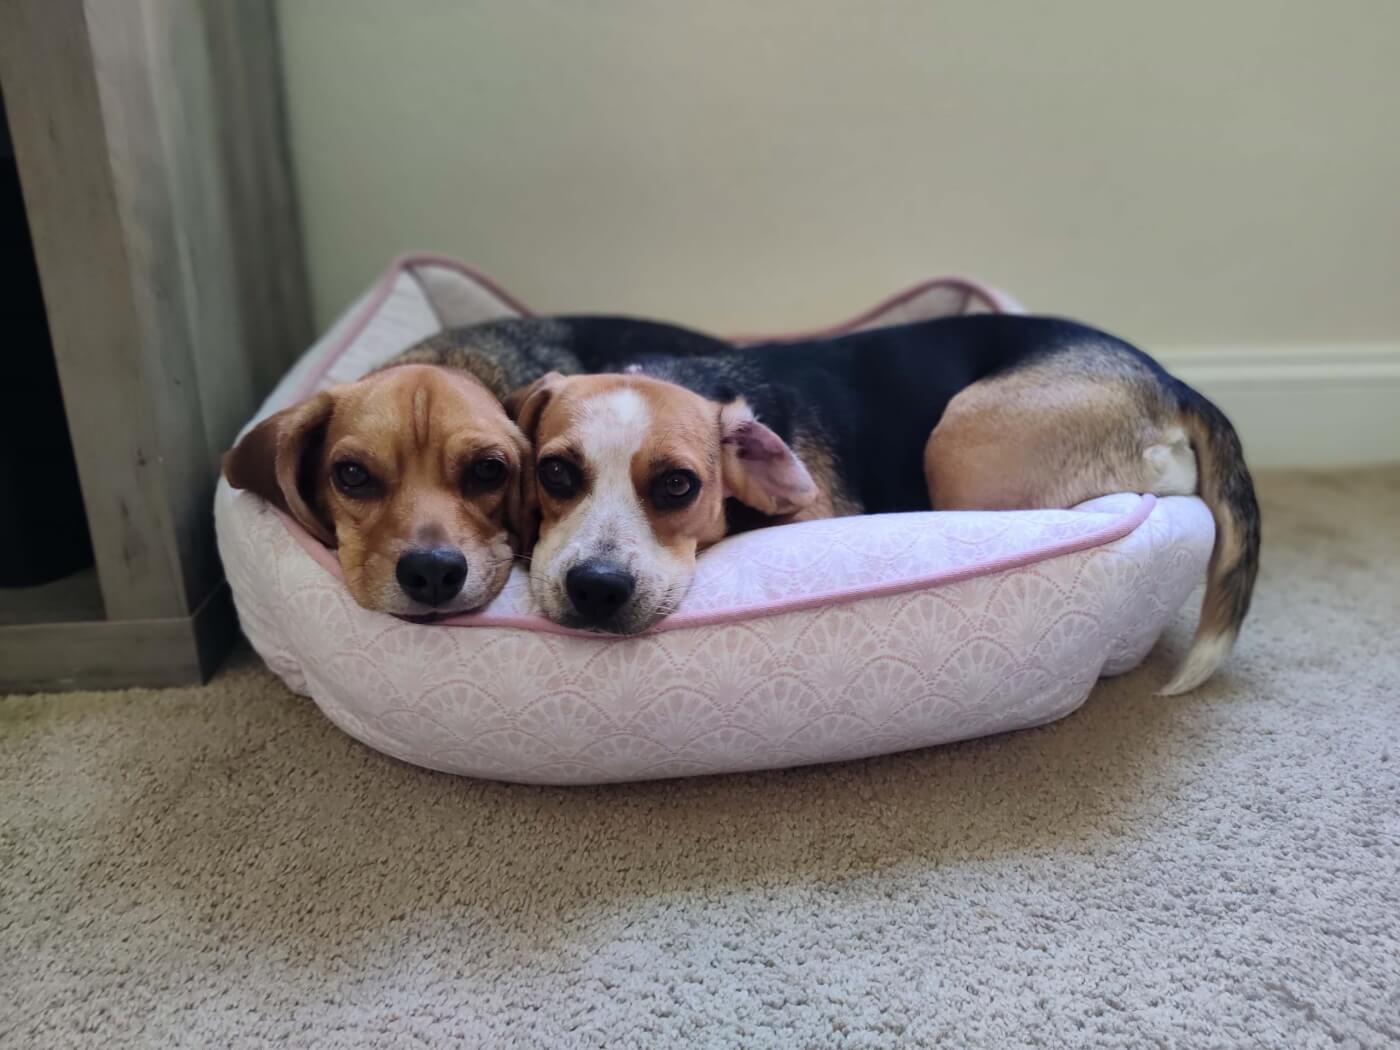 Two beagles cuddling together in a dog bed